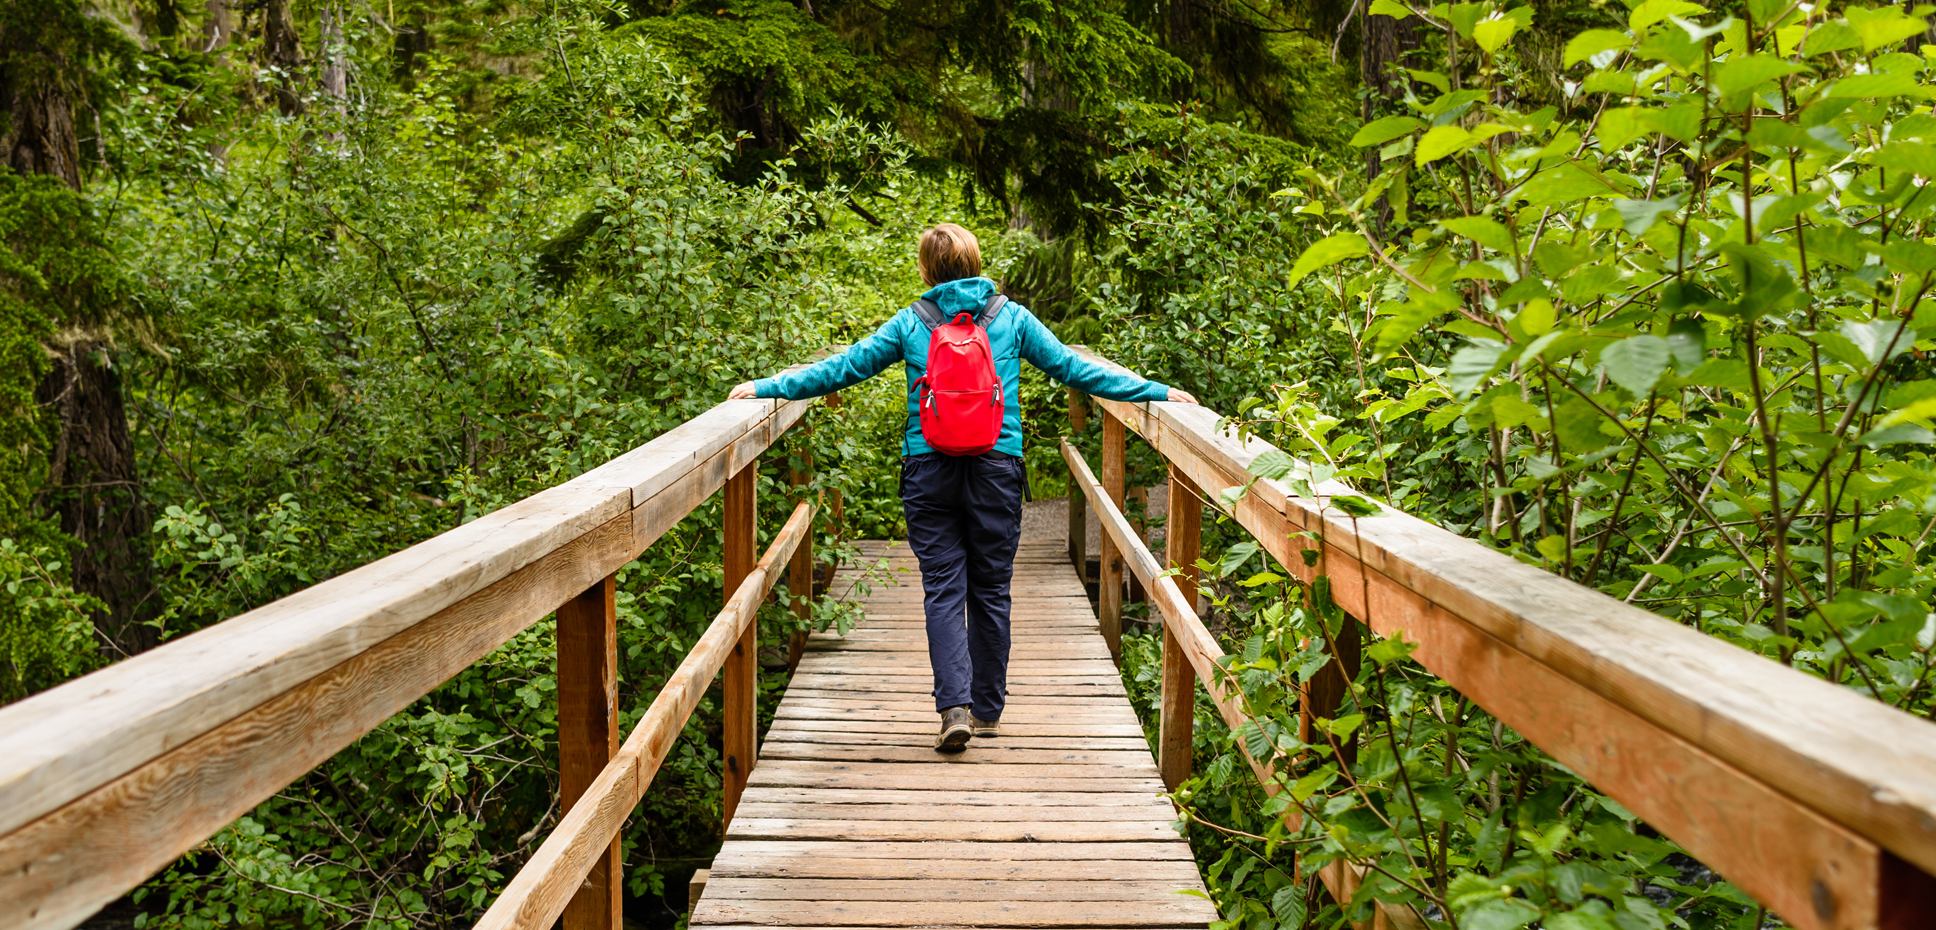 A woman crosses a wooden bridge while hiking in the woods